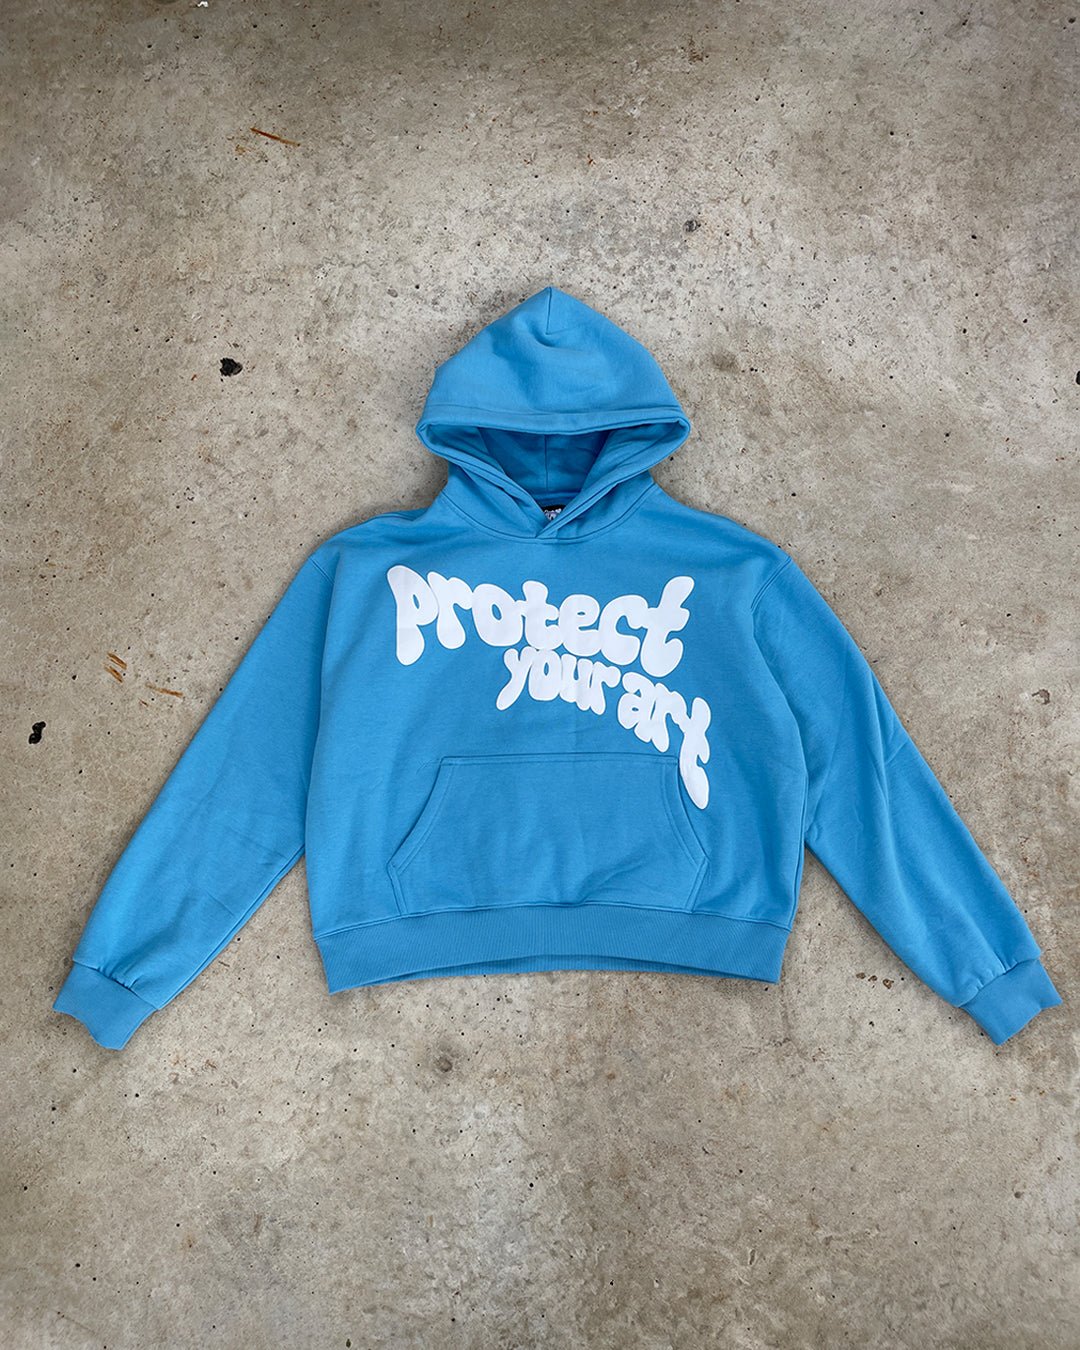 protect your art hoodie blue - Statement